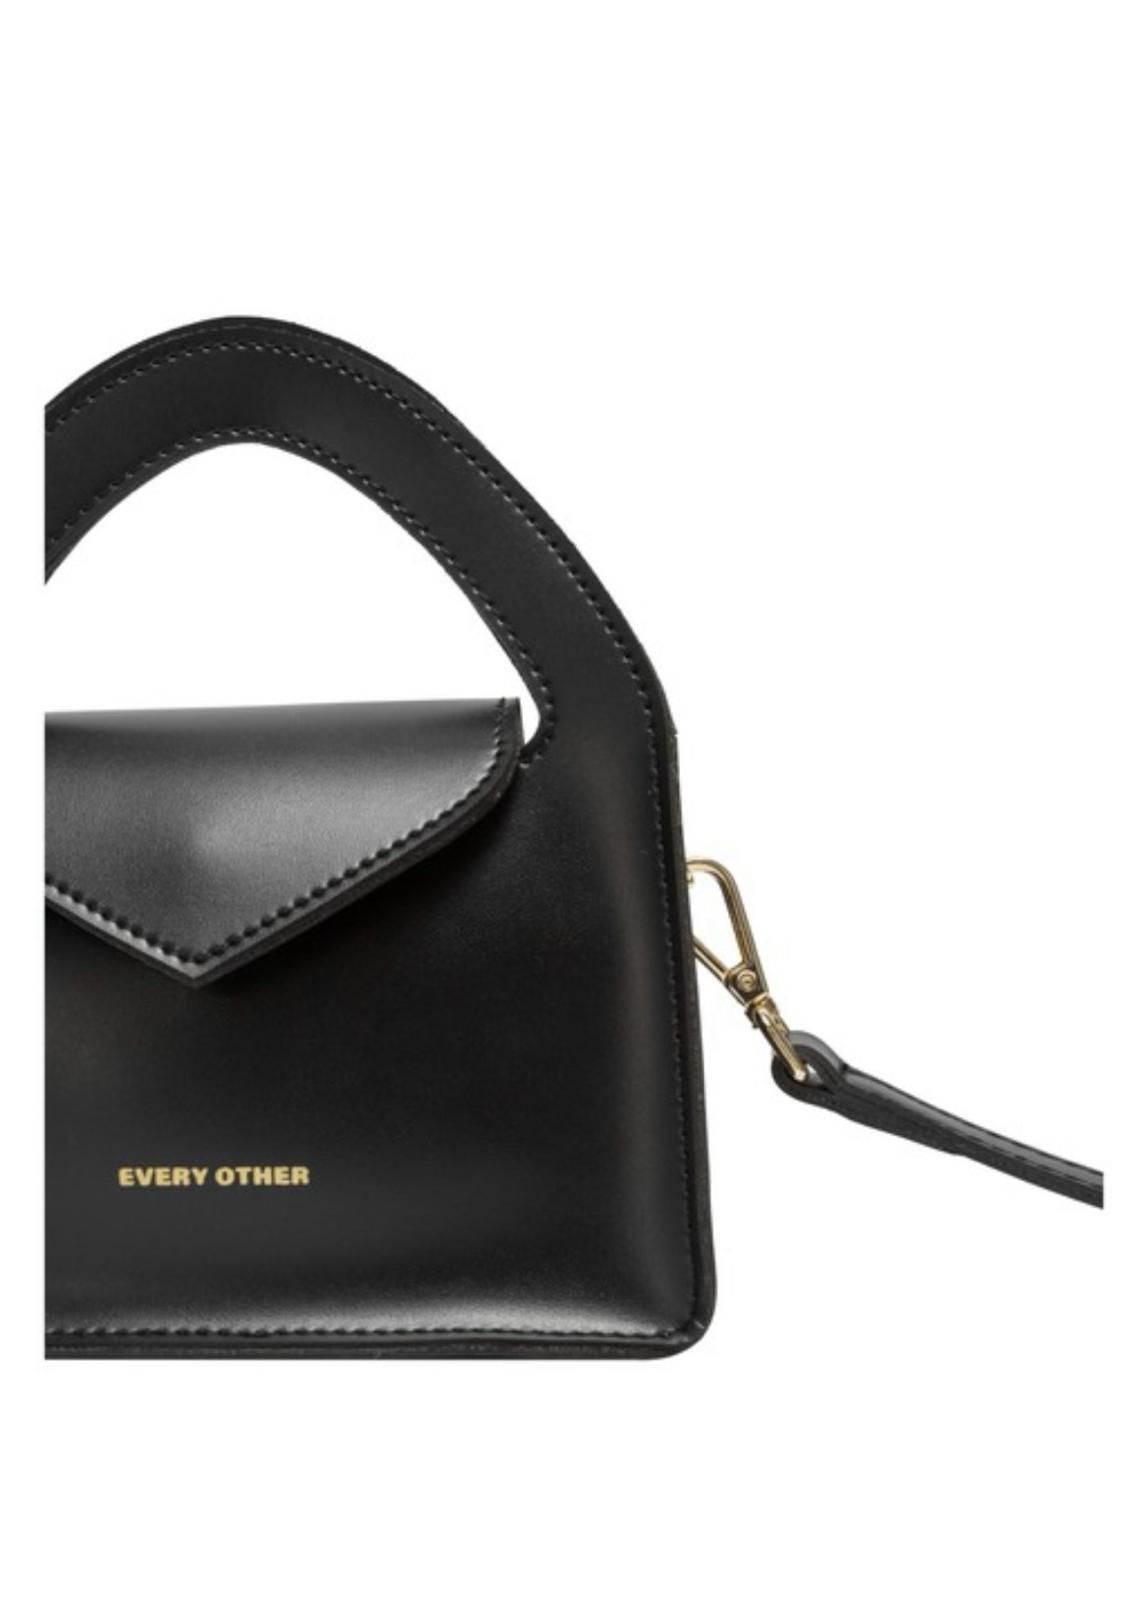 Black Small Clutch Bag with Detachable Strap